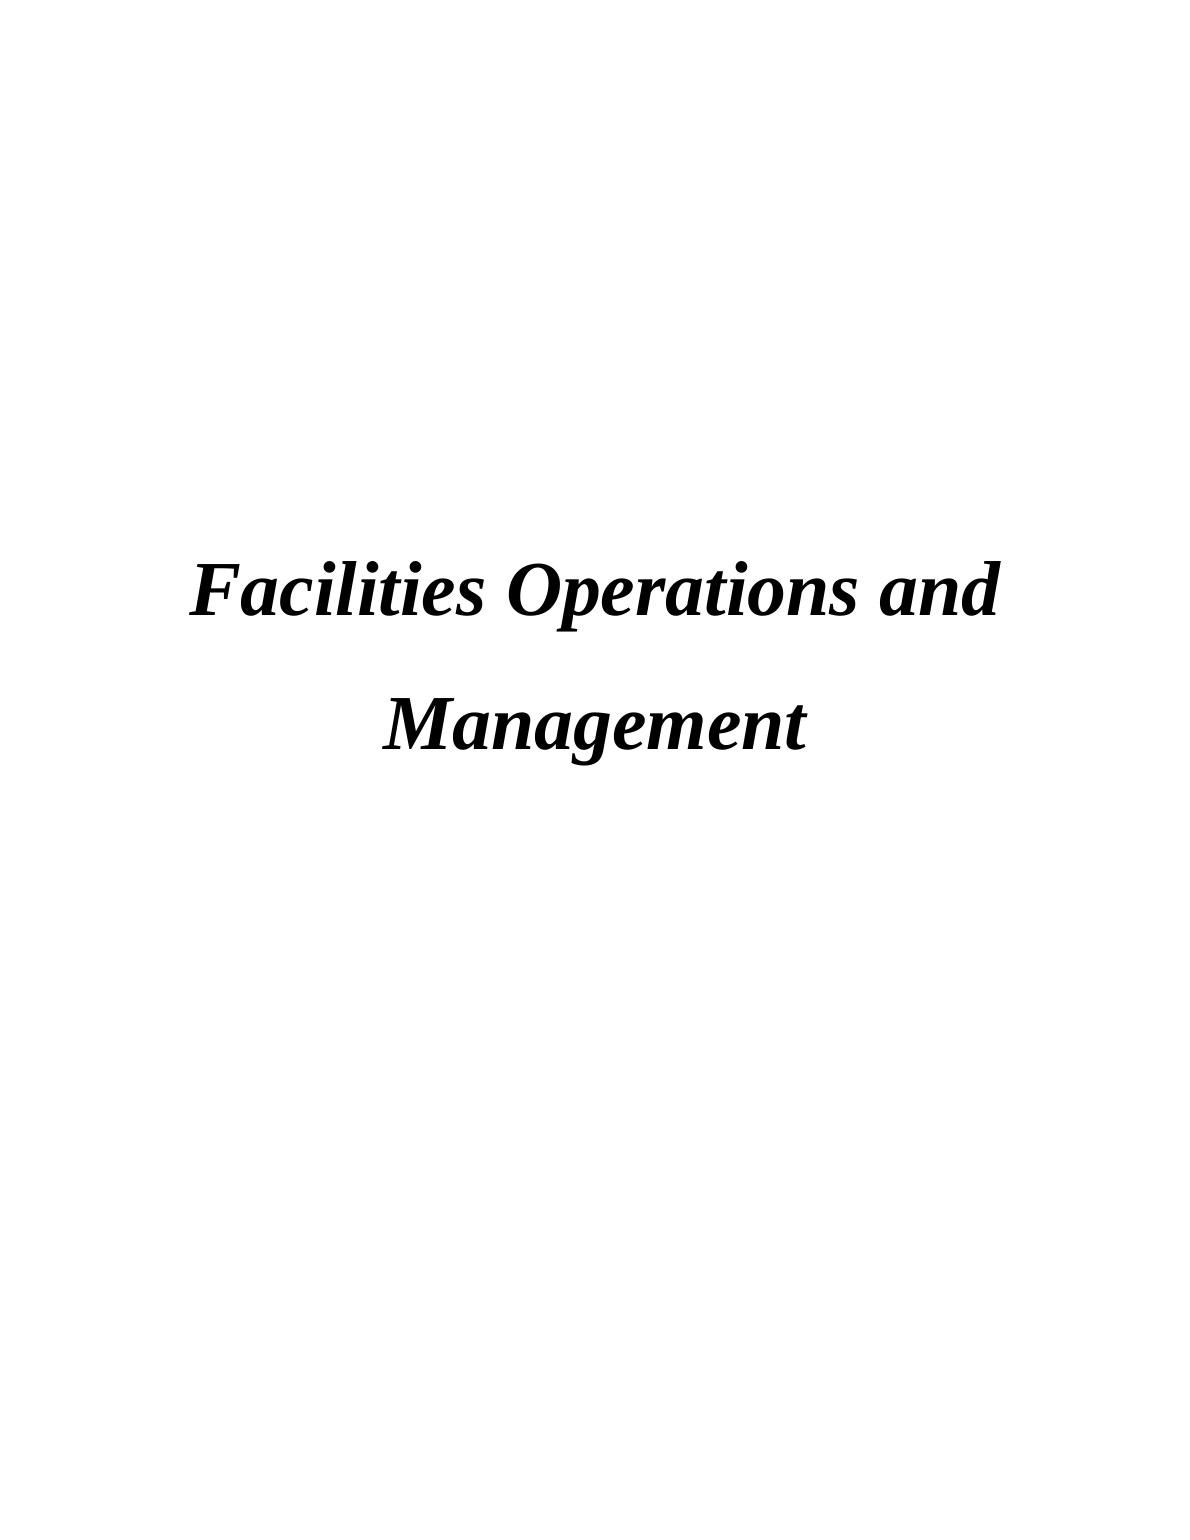 Facilities Operations and Management Assignment - Hotel Sophia_1